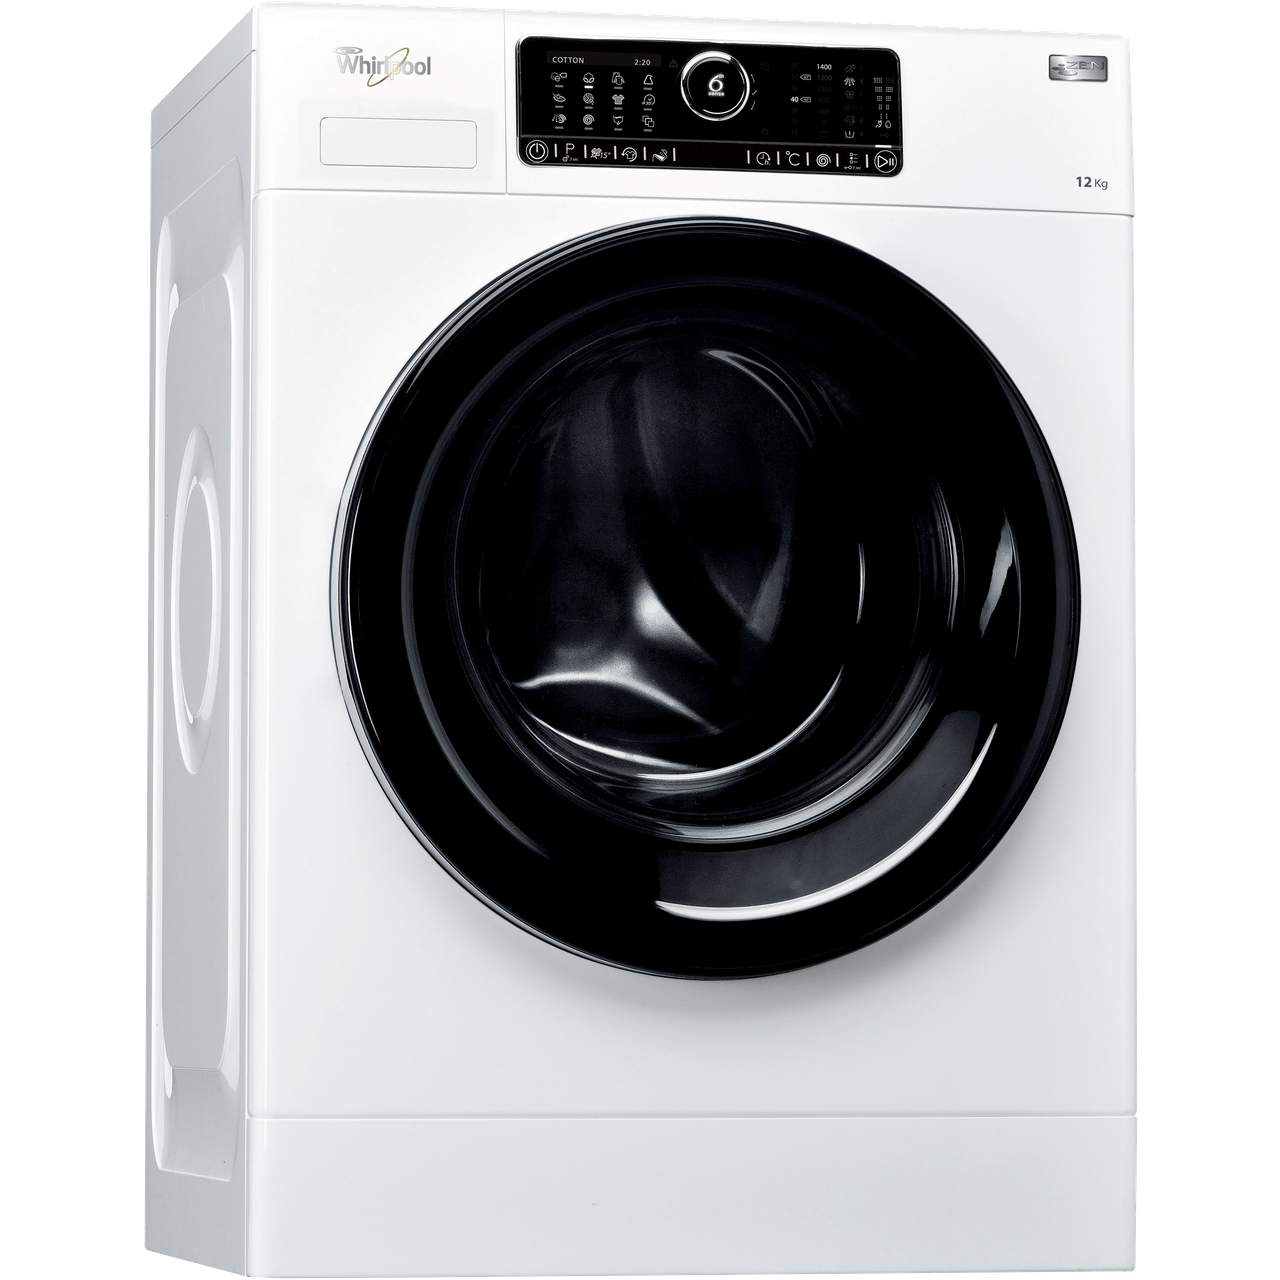 Whirlpool FSCR12441 Wifi Connected 12Kg Washing Machine with 1400 rpm specs